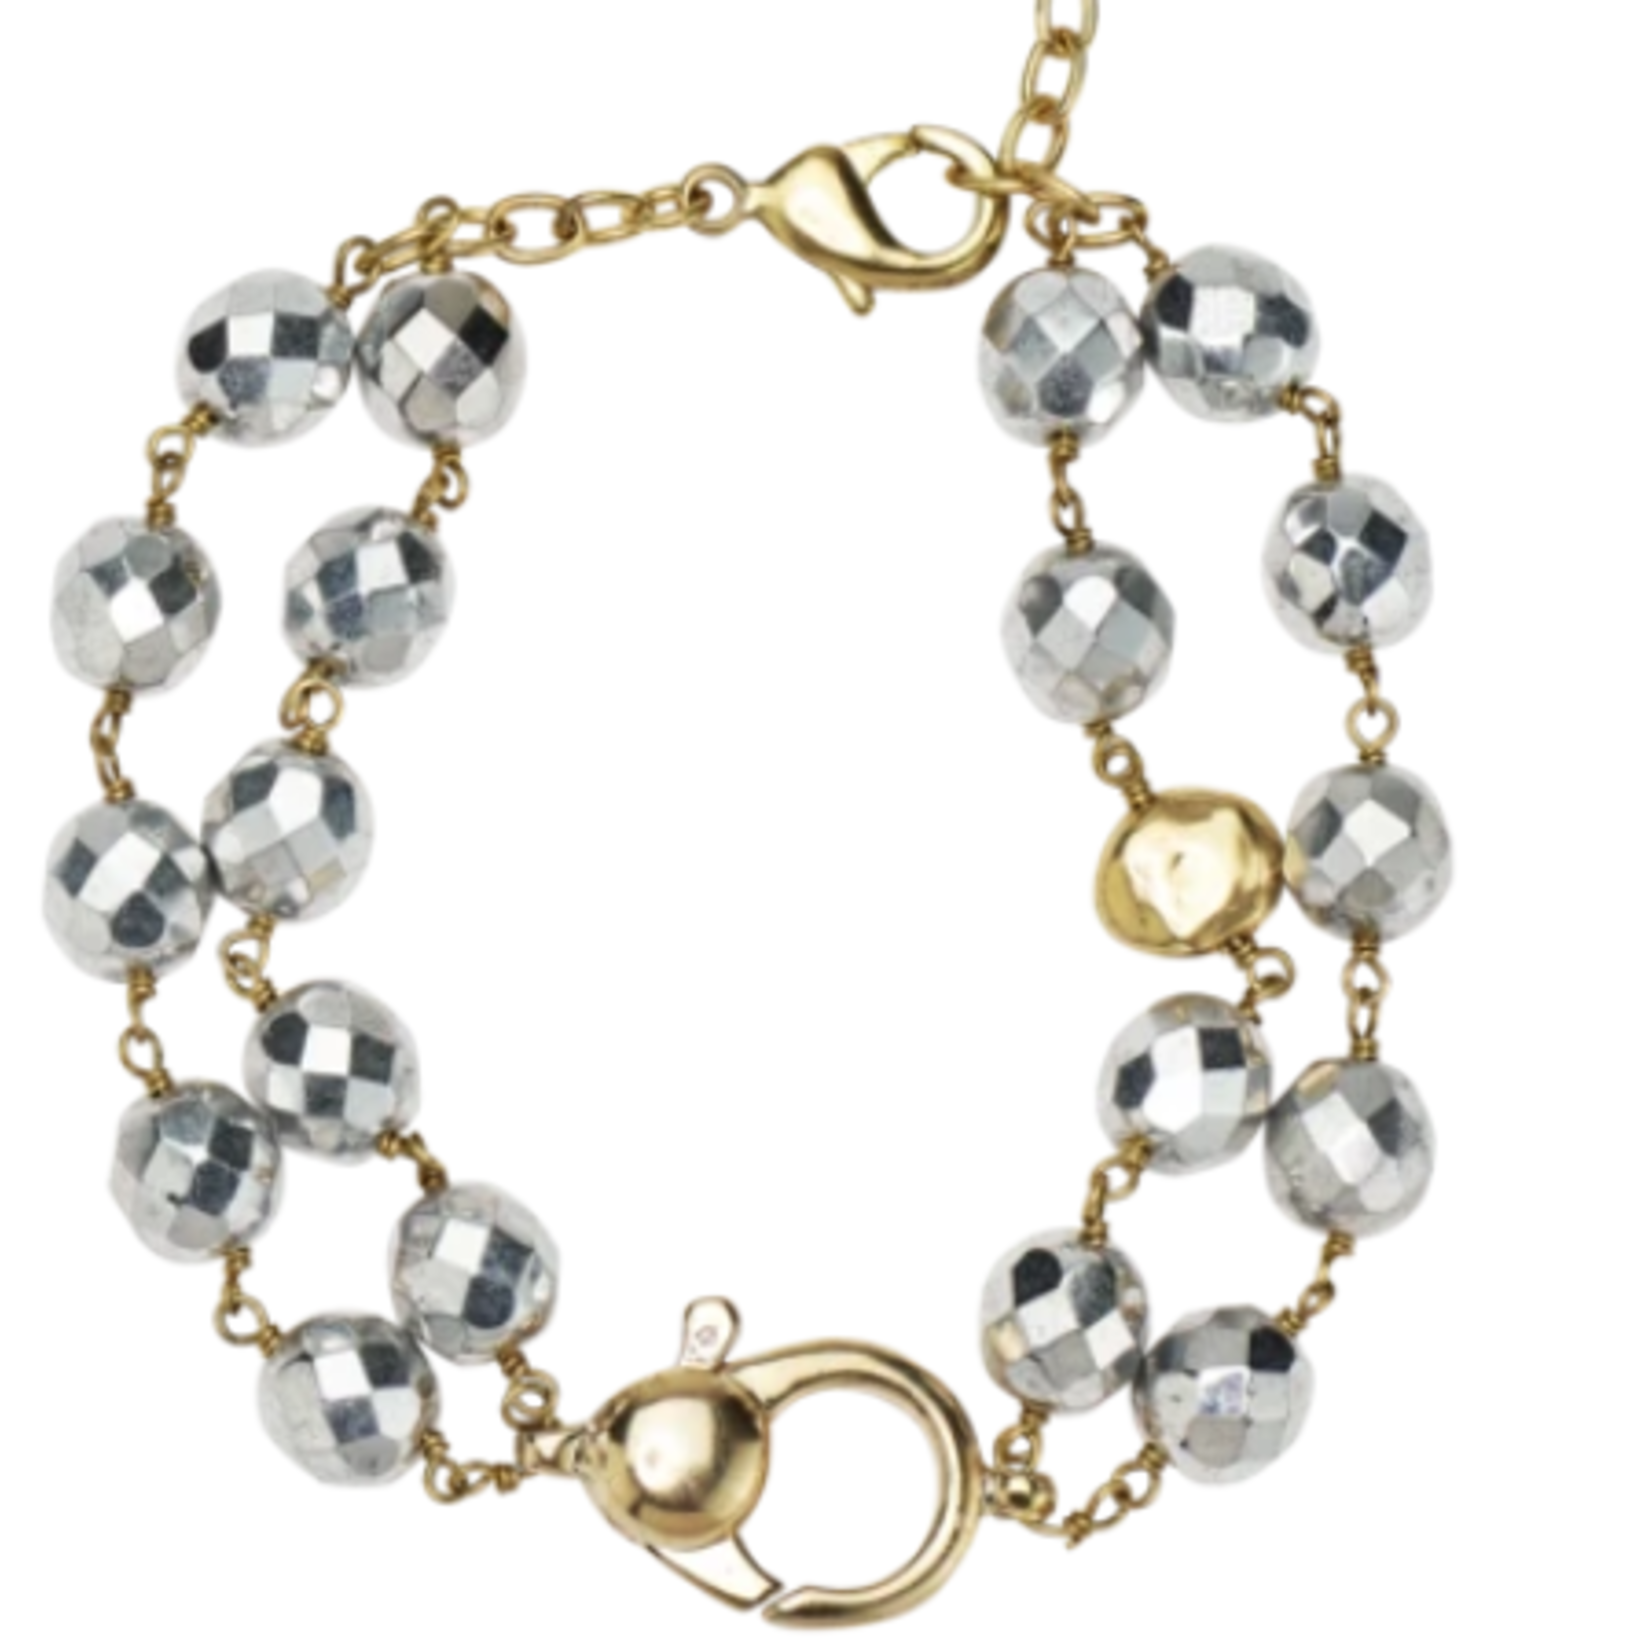 Ensemble bracelet - bright silver, brass and fire polished  glass